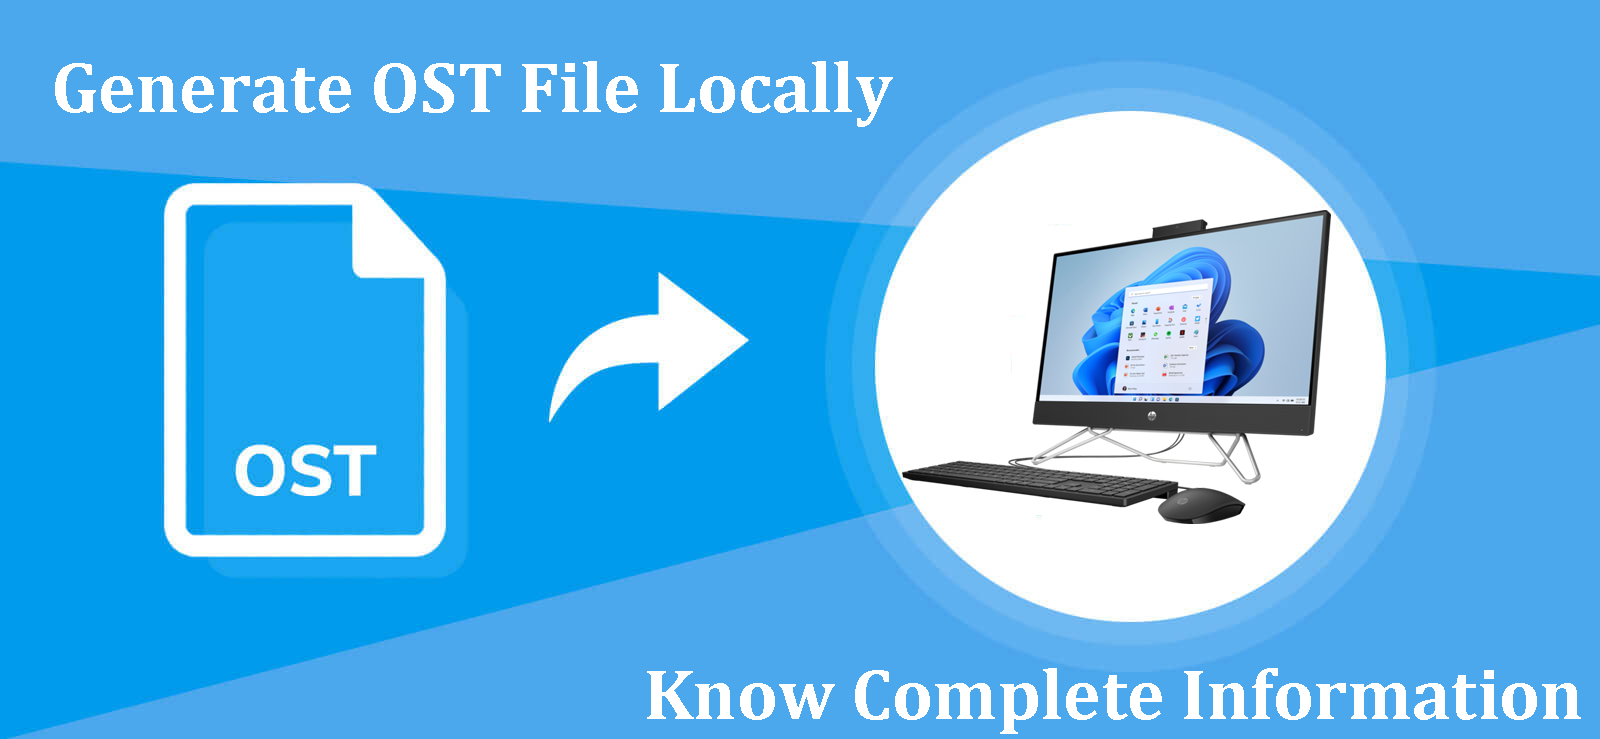 Generate OST File Locally – Know Complete Information